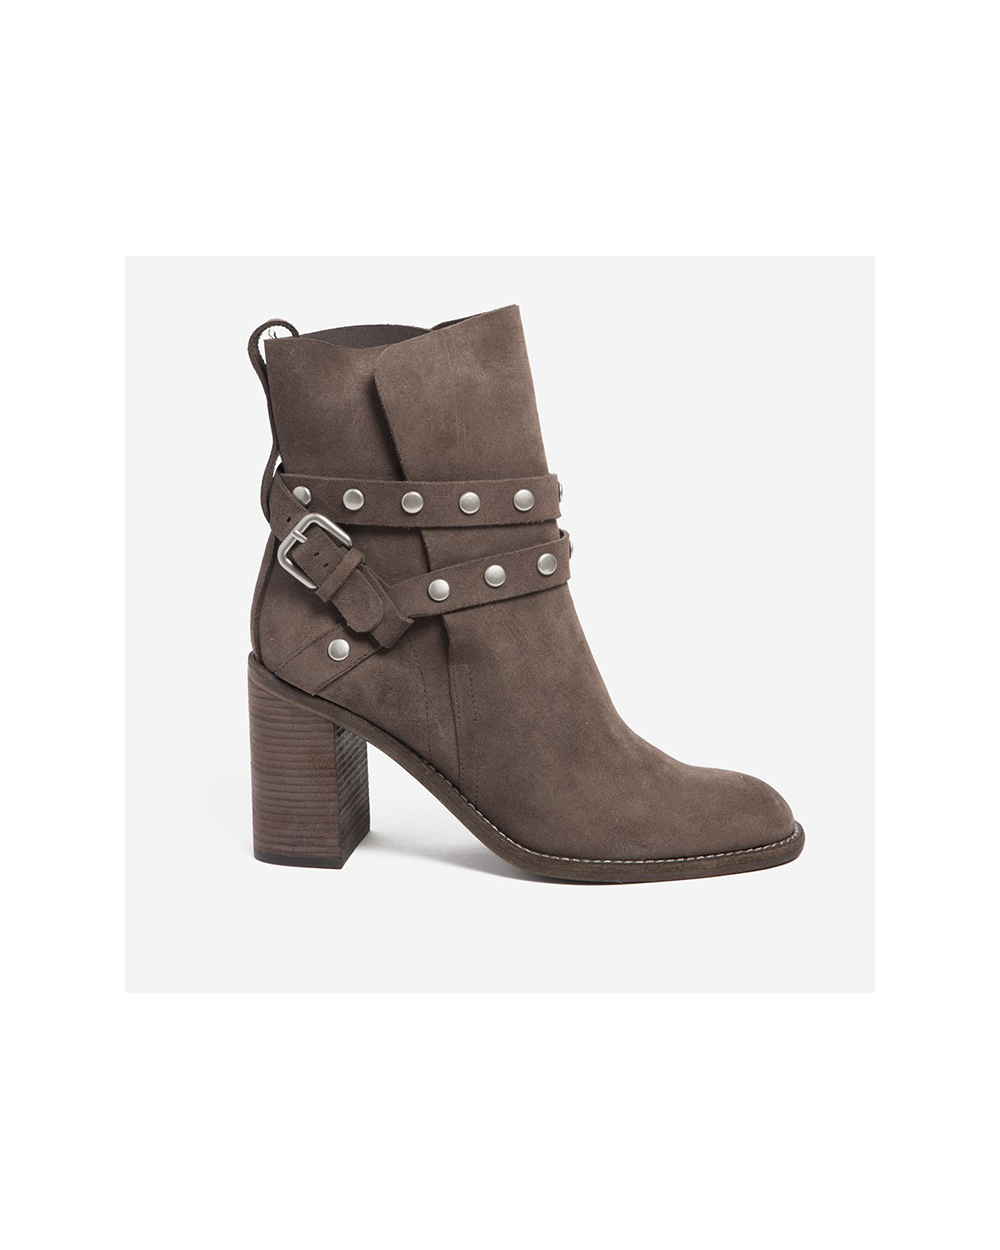 See by Chloe Boots, $798, From Workshop